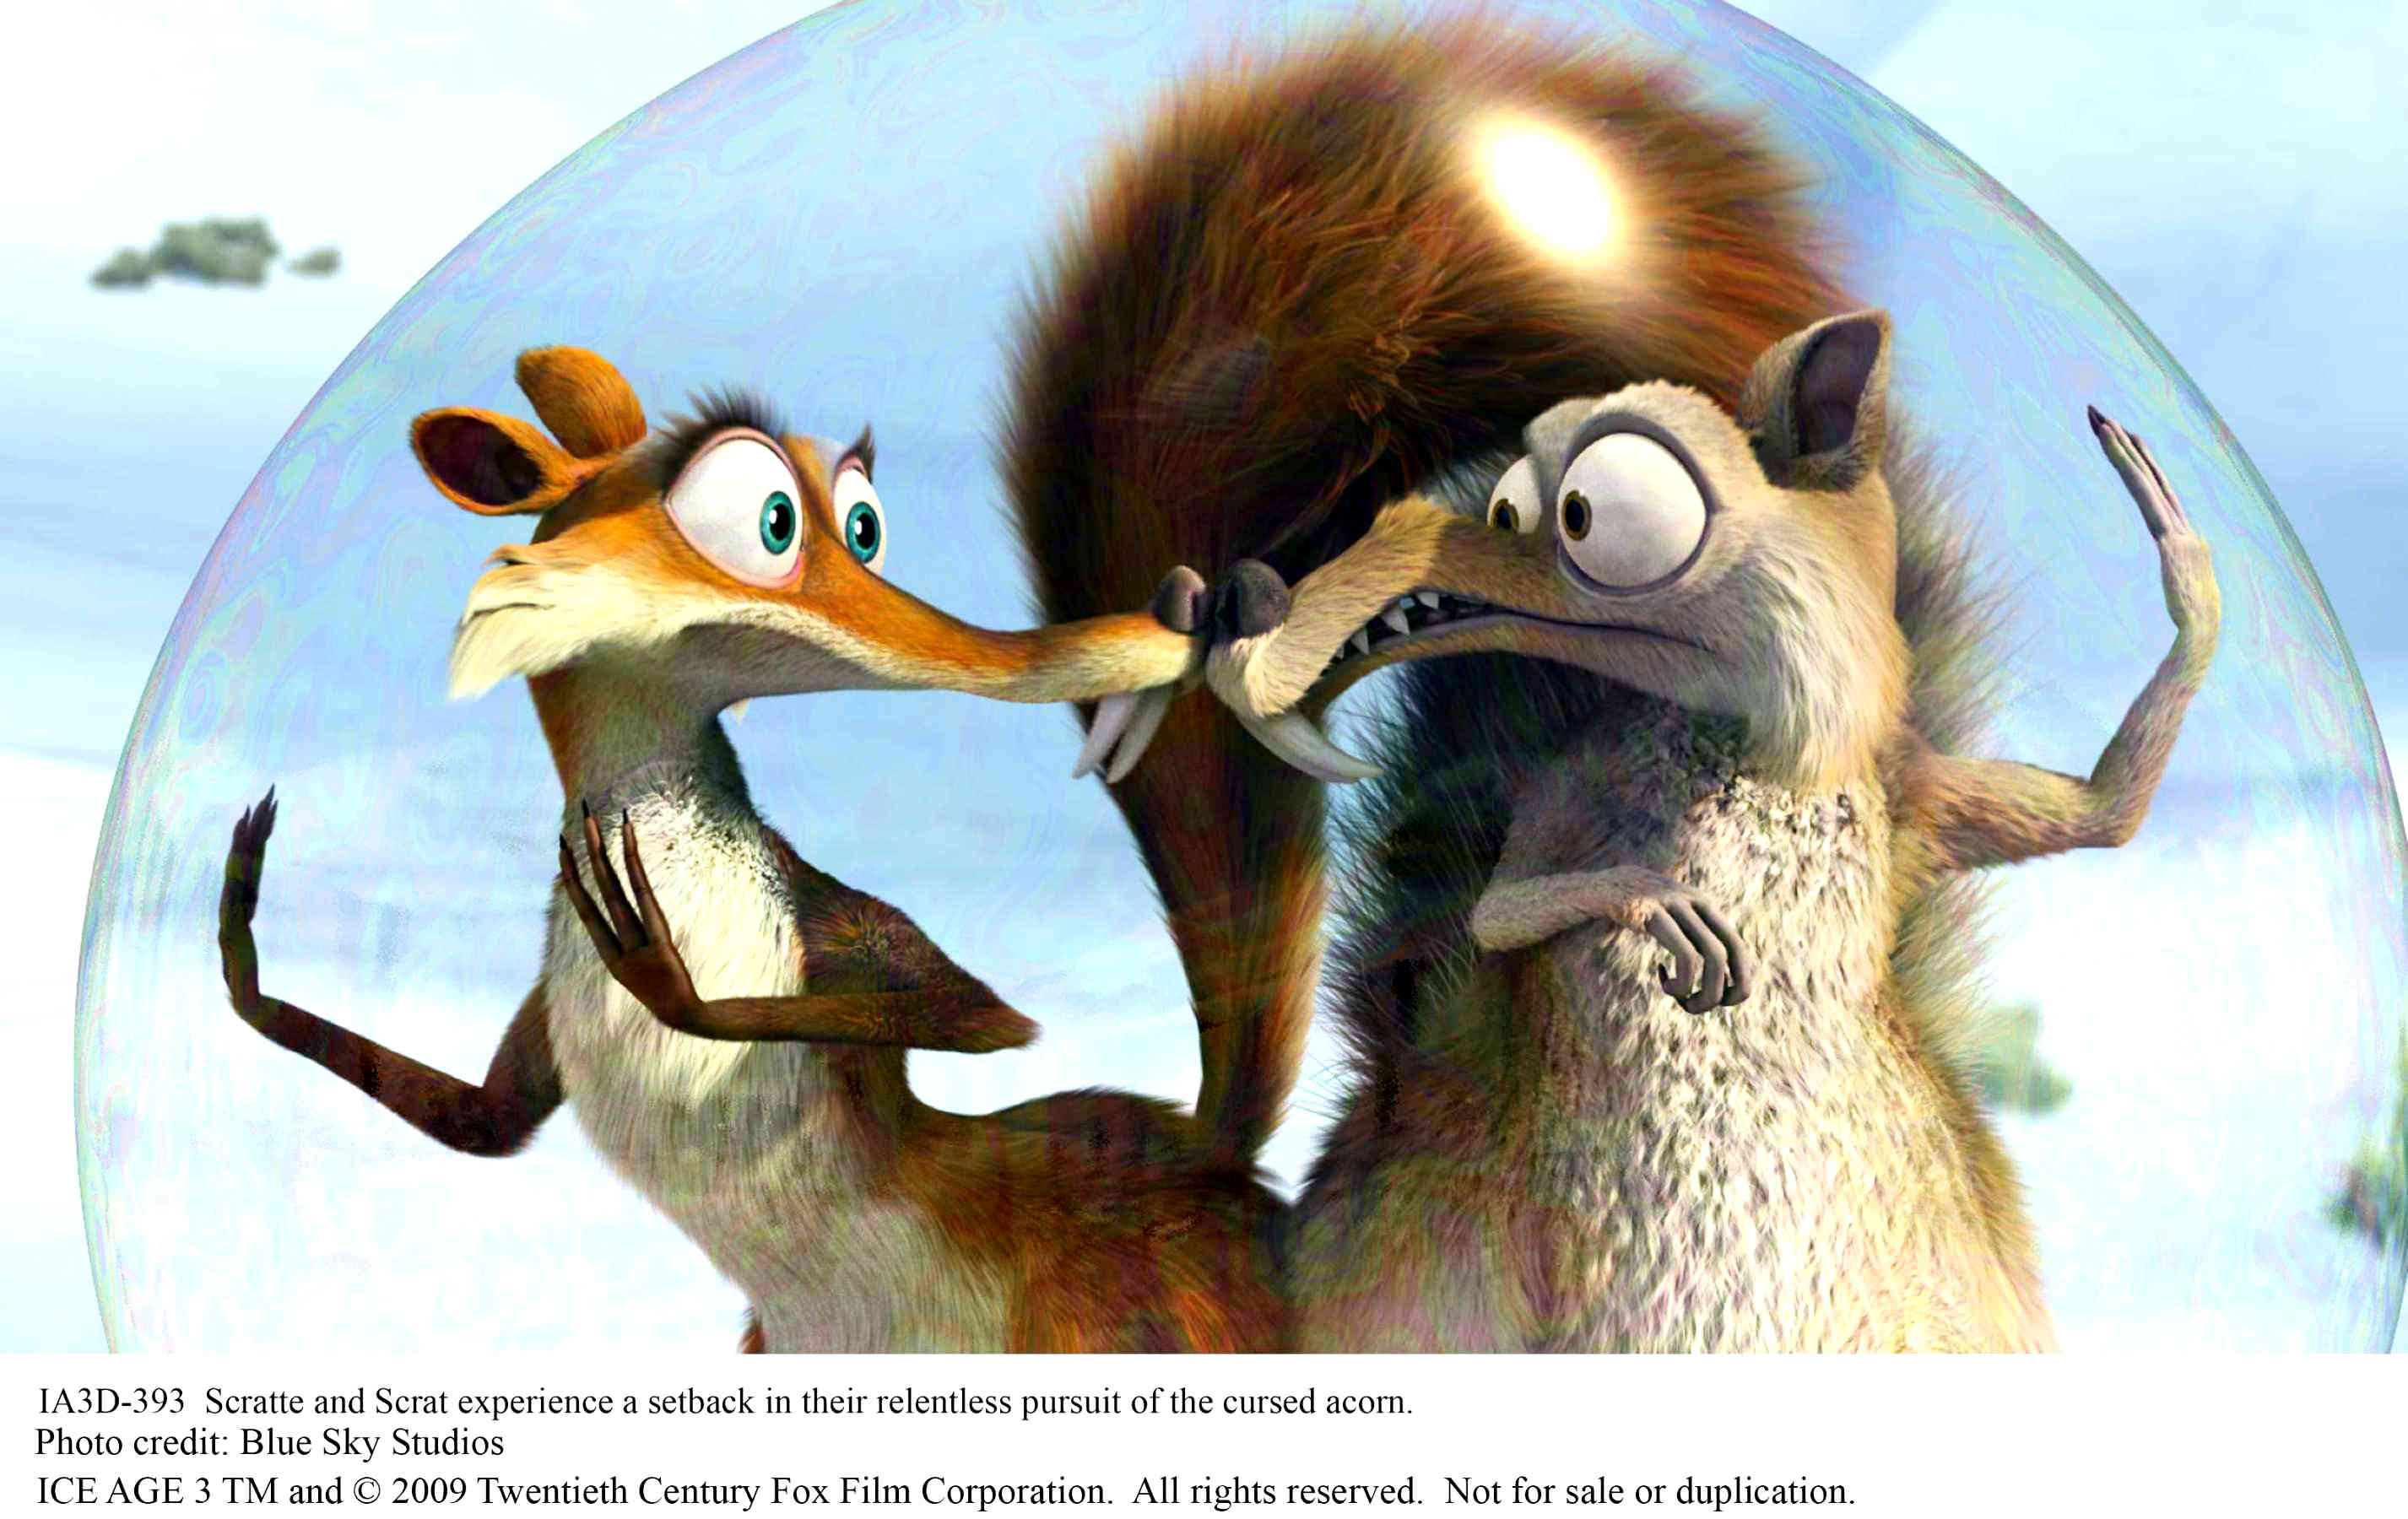 A scene from The 20th Century Fox's Ice Age: Dawn of the Dinosaurs (2009)